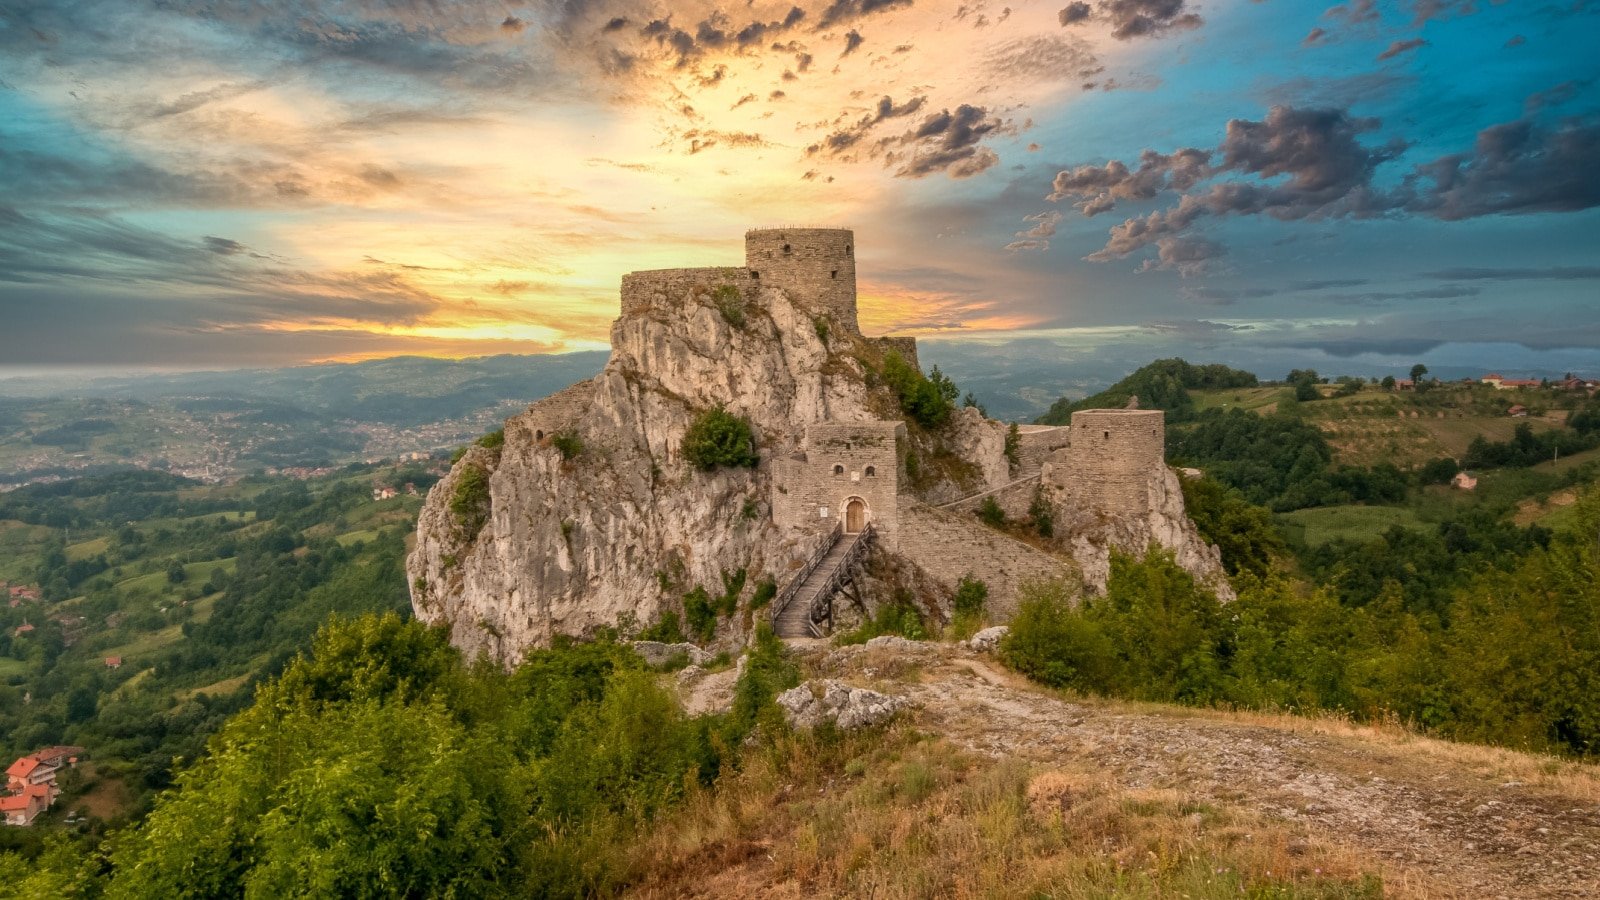 <p>Most people don't know it, but Bosnia was once a mighty kingdom that covered much of the region. Many fortresses remain from that period, incredible castles in stunning locations serving awe-inspiring views. Srebrenik and Ostrožac (near Cazin) are the most beautiful, while Blagaj, Bobovac, and Sarajevo's Bijela Tabija are the oldest. All are gorgeous in their unique way.</p>